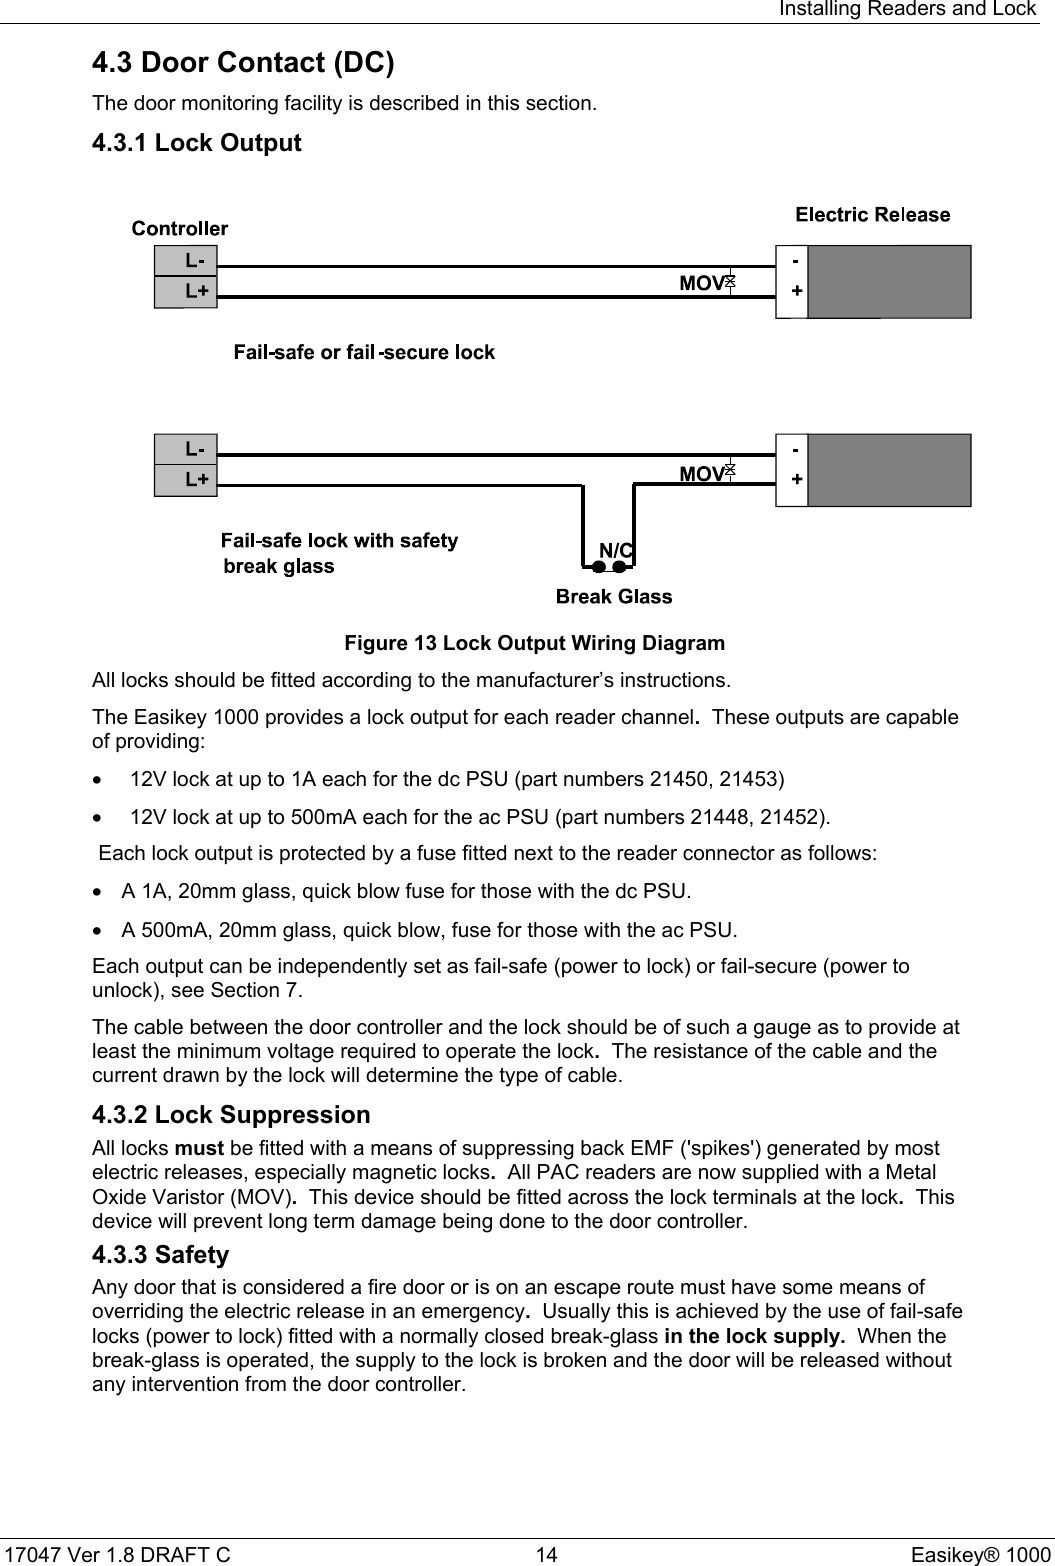 Installing Readers and Lock17047 Ver 1.8 DRAFT C  14 Easikey® 10004.3 Door Contact (DC)The door monitoring facility is described in this section.4.3.1 Lock OutputFigure 13 Lock Output Wiring DiagramAll locks should be fitted according to the manufacturer’s instructions.The Easikey 1000 provides a lock output for each reader channel.  These outputs are capableof providing:•  12V lock at up to 1A each for the dc PSU (part numbers 21450, 21453)•  12V lock at up to 500mA each for the ac PSU (part numbers 21448, 21452).Each lock output is protected by a fuse fitted next to the reader connector as follows:•  A 1A, 20mm glass, quick blow fuse for those with the dc PSU.•  A 500mA, 20mm glass, quick blow, fuse for those with the ac PSU.Each output can be independently set as fail-safe (power to lock) or fail-secure (power tounlock), see Section 7.The cable between the door controller and the lock should be of such a gauge as to provide atleast the minimum voltage required to operate the lock.  The resistance of the cable and thecurrent drawn by the lock will determine the type of cable.4.3.2 Lock SuppressionAll locks must be fitted with a means of suppressing back EMF (&apos;spikes&apos;) generated by mostelectric releases, especially magnetic locks.  All PAC readers are now supplied with a MetalOxide Varistor (MOV).  This device should be fitted across the lock terminals at the lock.  Thisdevice will prevent long term damage being done to the door controller.4.3.3 SafetyAny door that is considered a fire door or is on an escape route must have some means ofoverriding the electric release in an emergency.  Usually this is achieved by the use of fail-safelocks (power to lock) fitted with a normally closed break-glass in the lock supply.  When thebreak-glass is operated, the supply to the lock is broken and the door will be released withoutany intervention from the door controller.